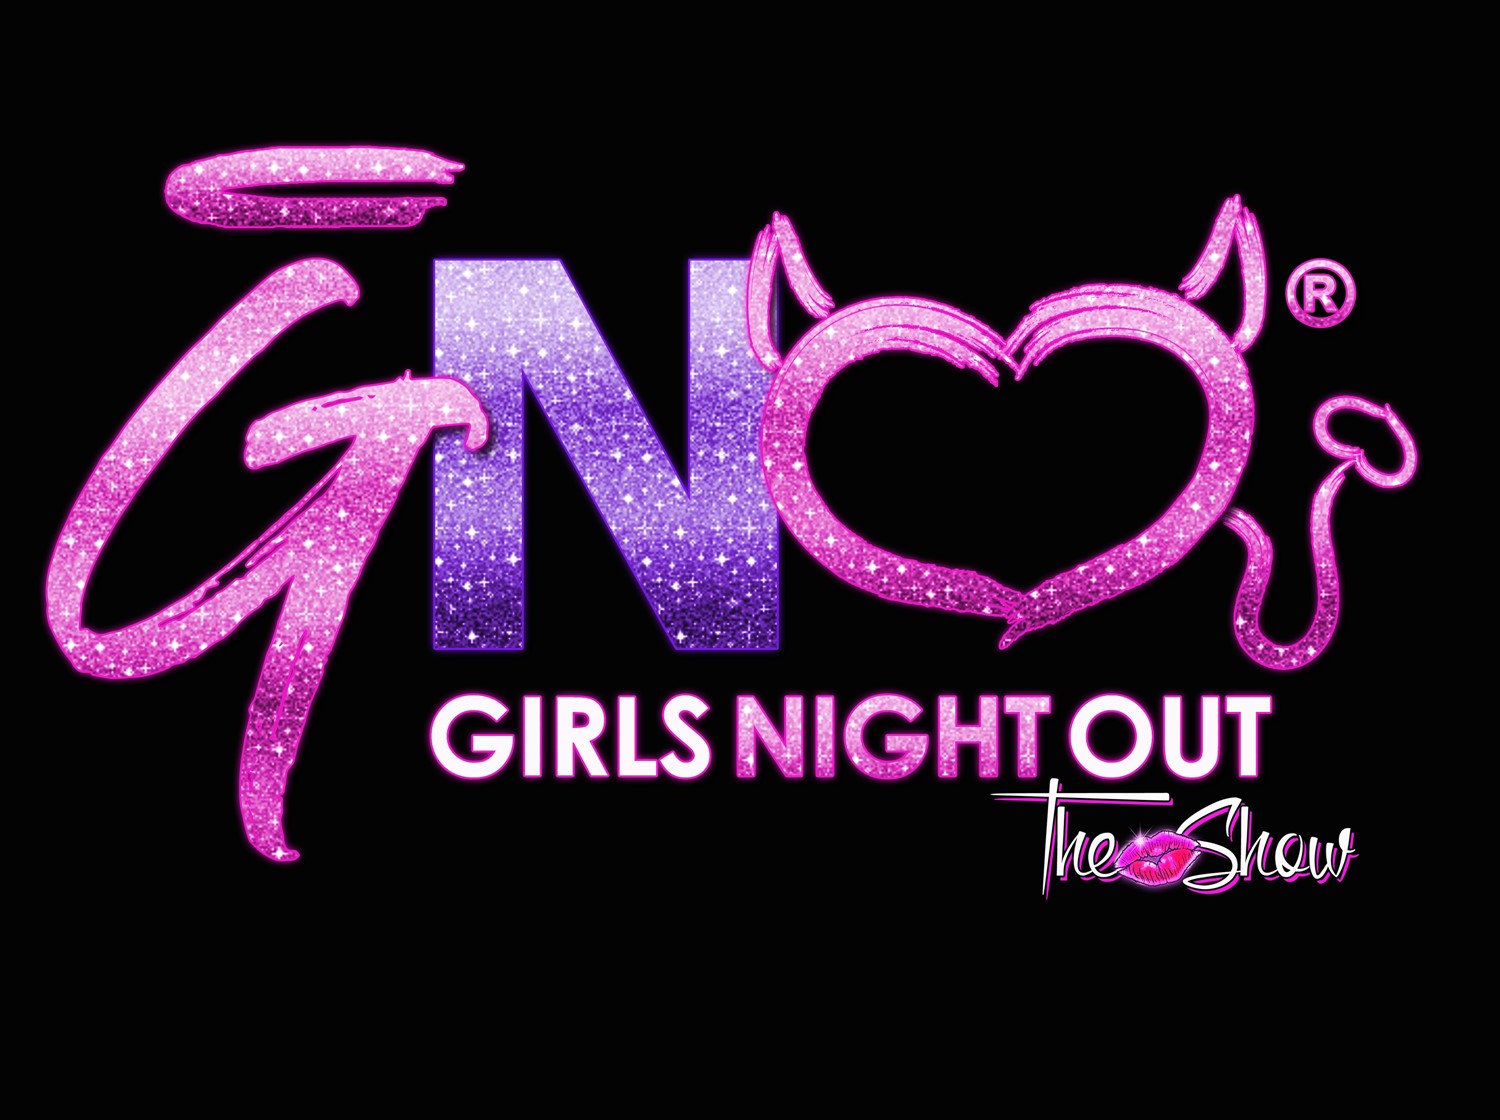 Thompson House (18+) Newport, KY on May 25, 20:00@Thompson House - Buy tickets and Get information on Girls Night Out the Show tickets.girlsnightouttheshow.com